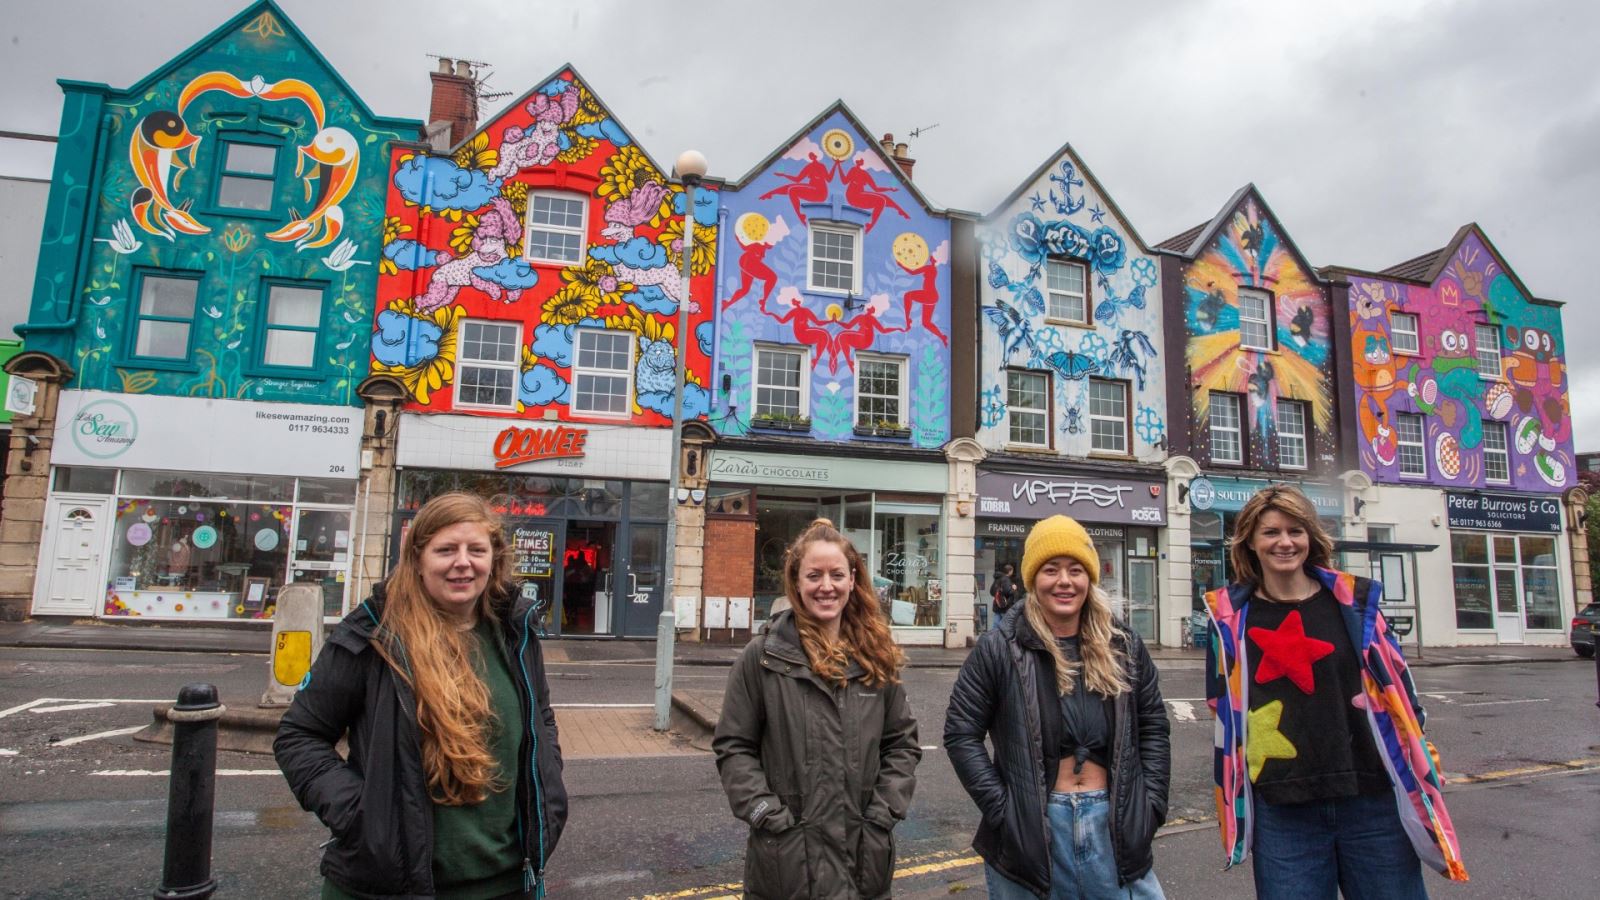 Left to right, artists EJITS, Bex Glover, Sophie Long, Lucas Antics in front of their mural